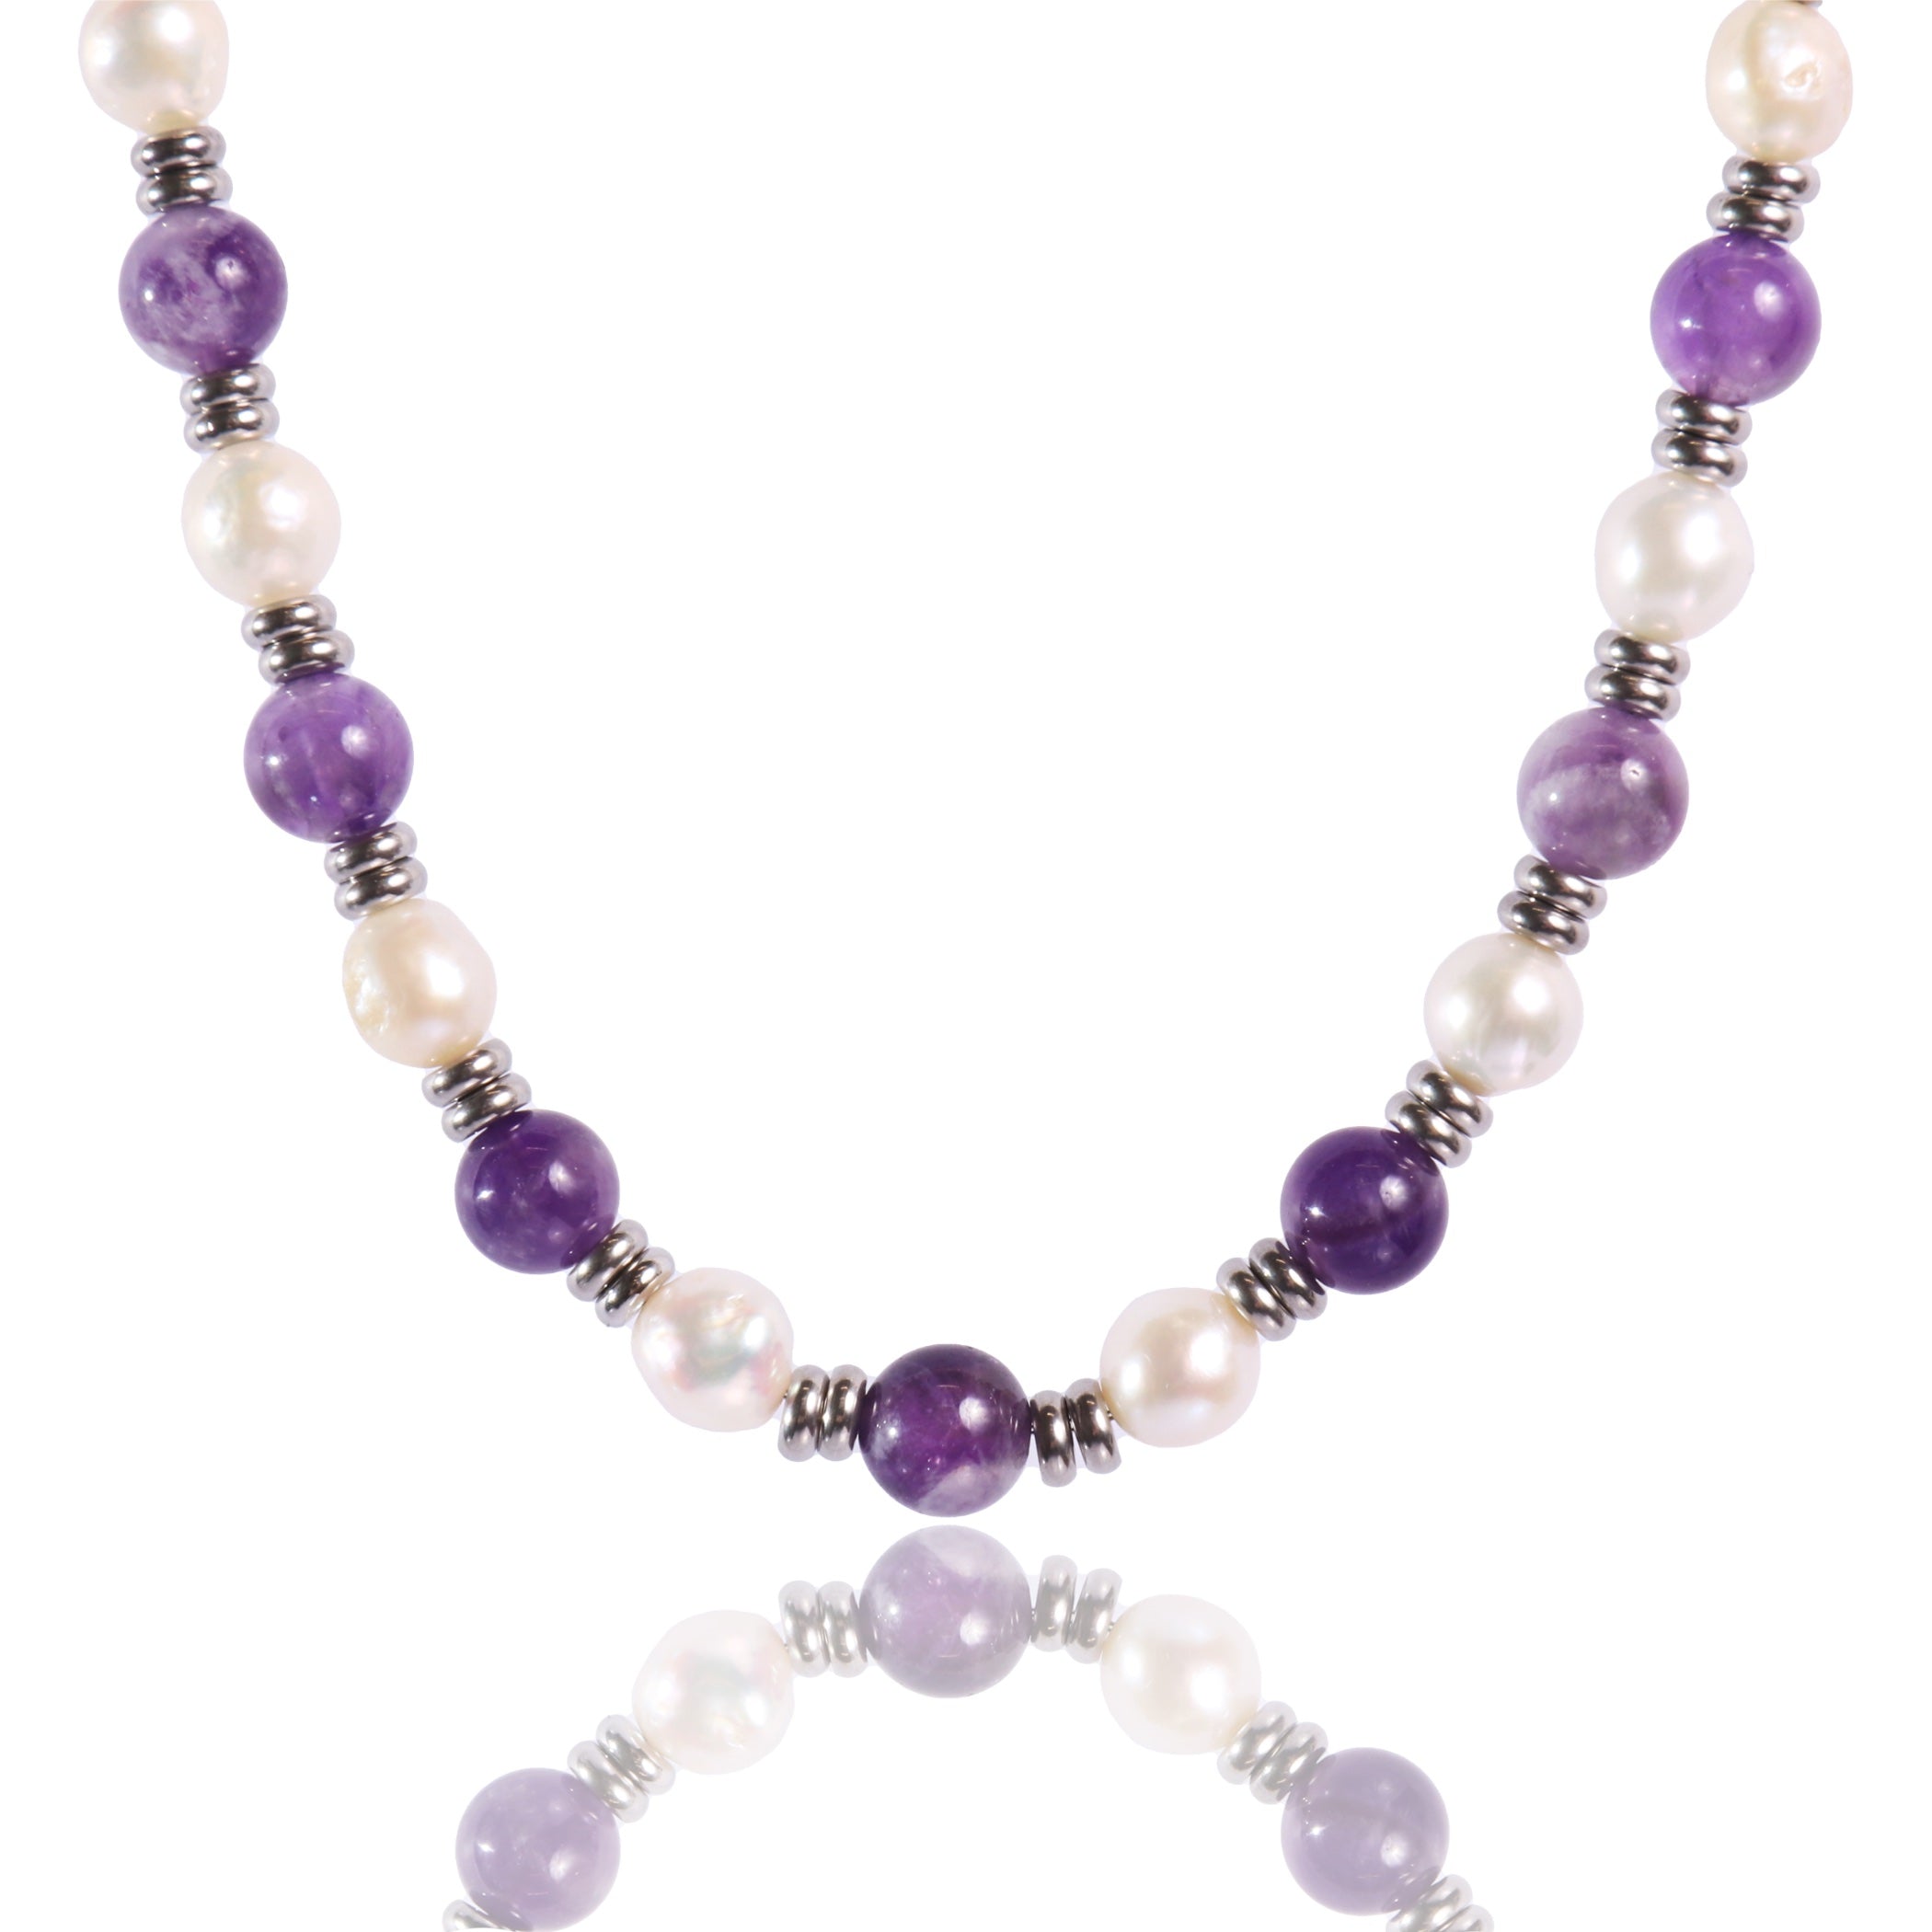 PEARL AND AMETHYST NICKLACE